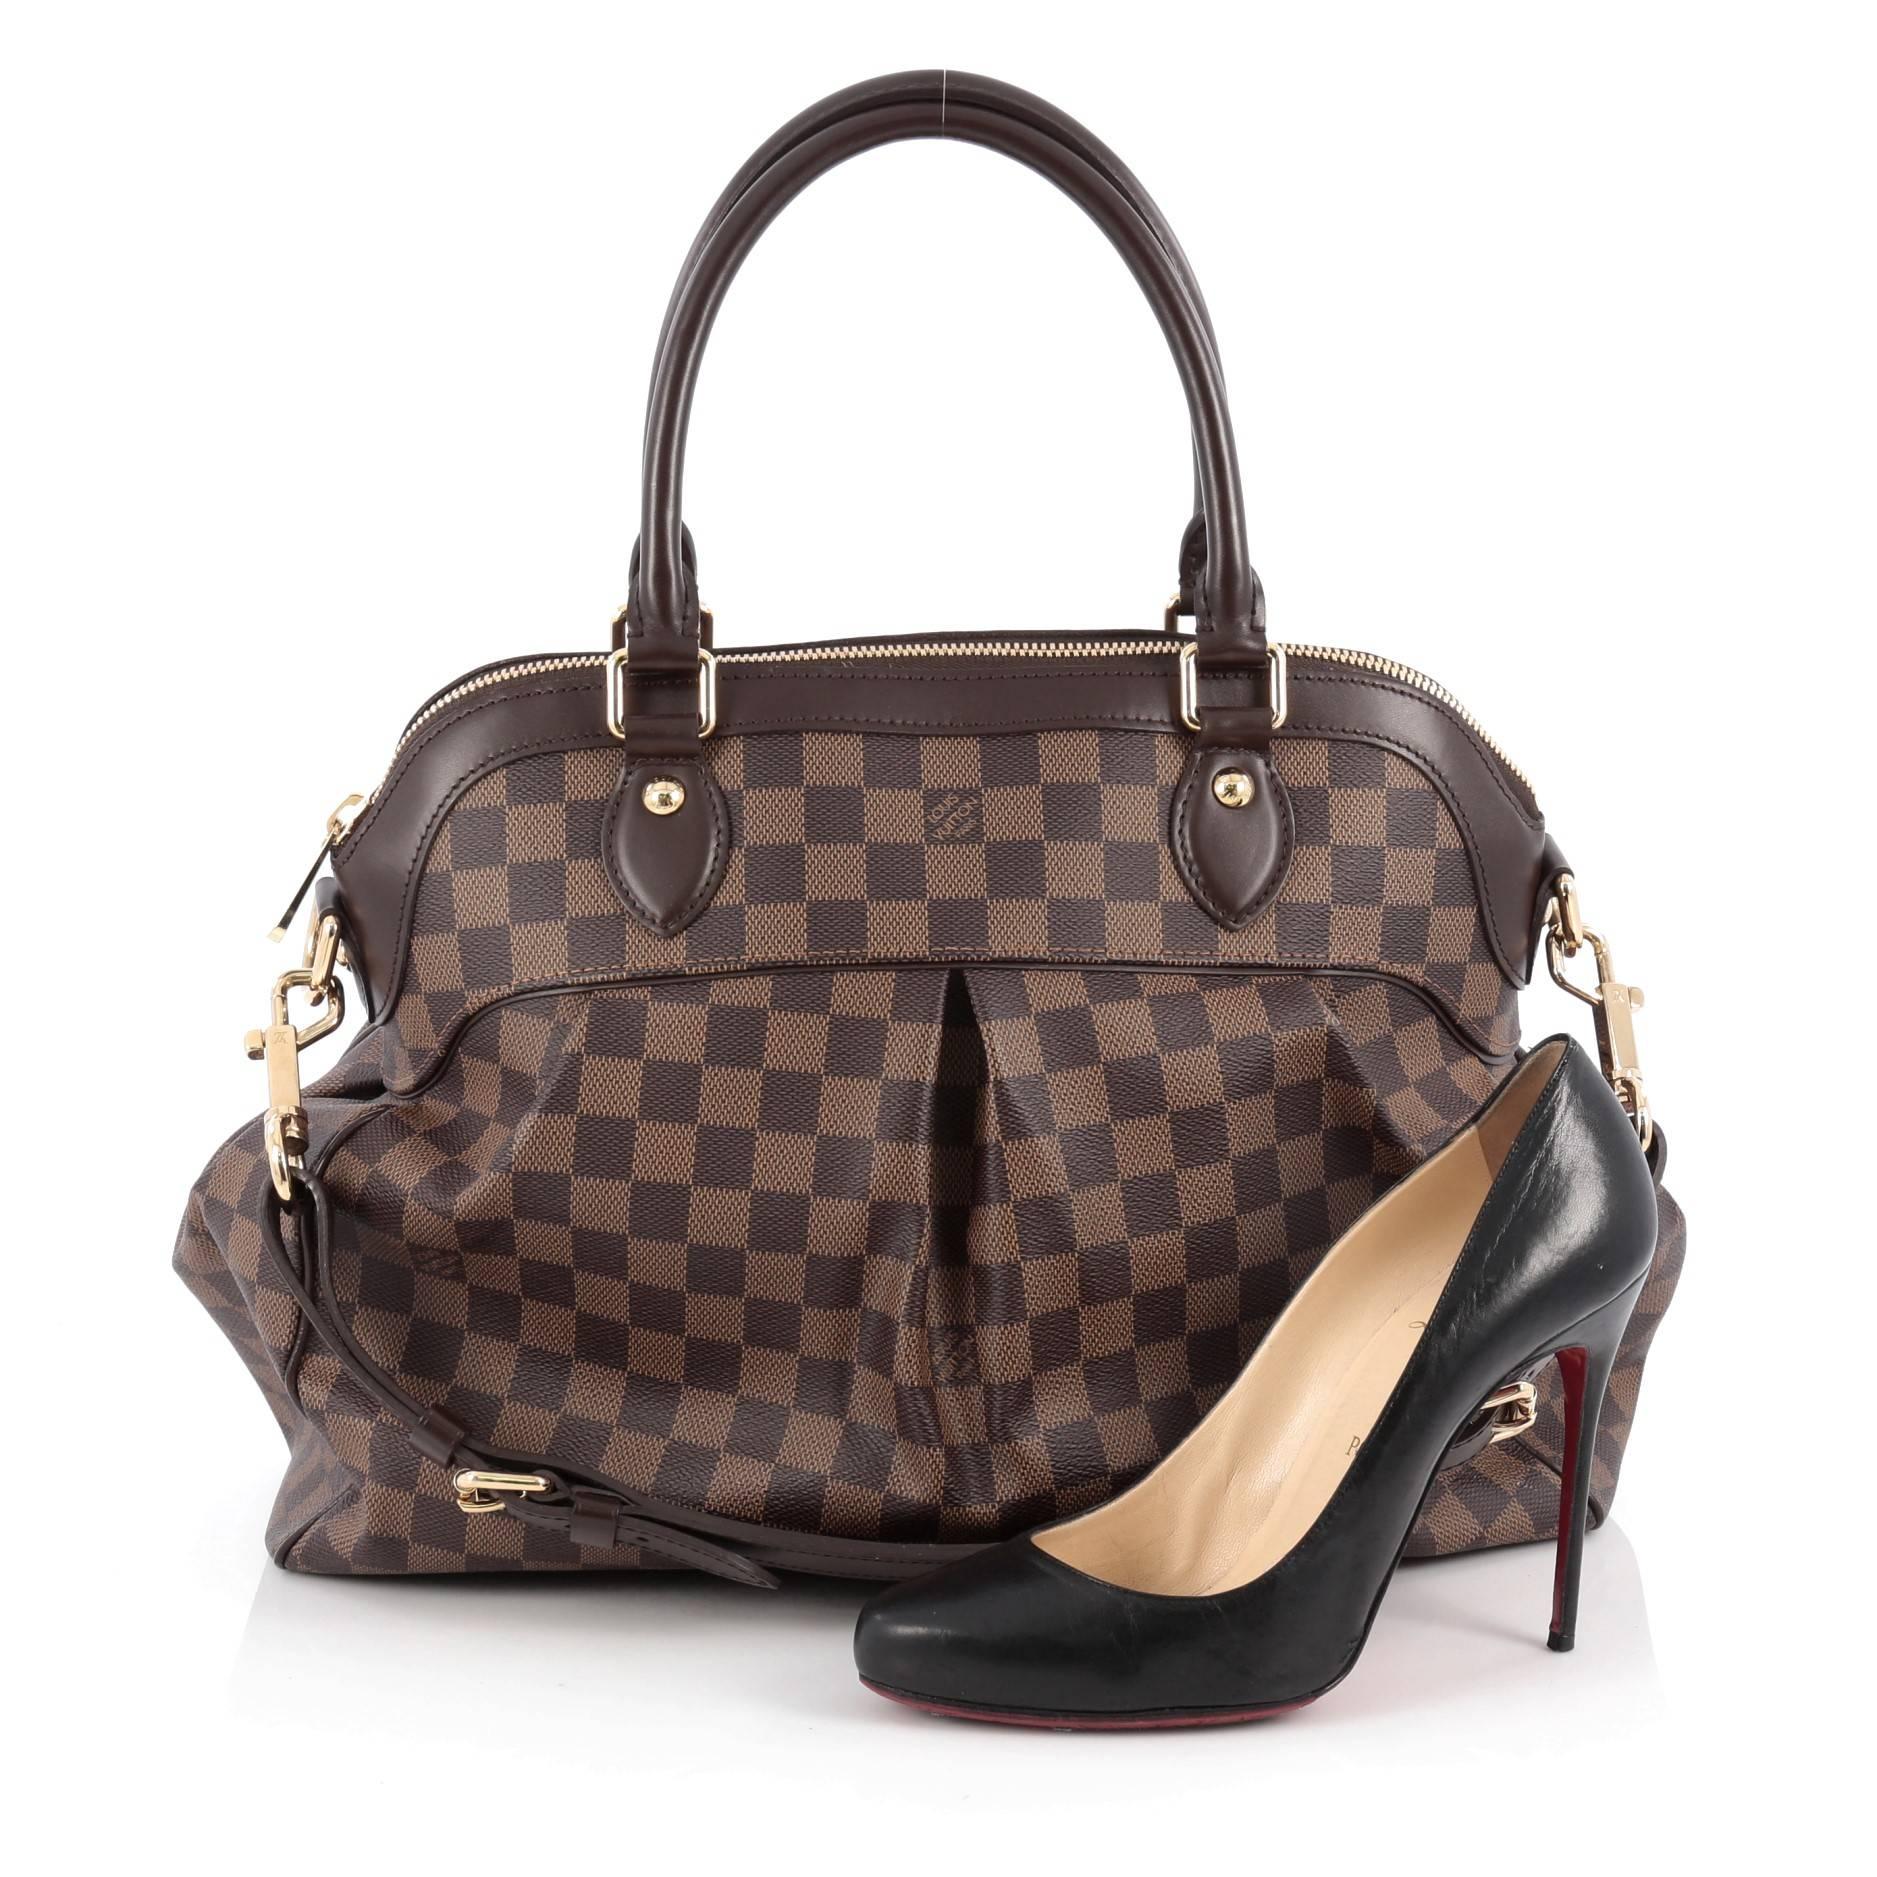 This authentic Louis Vuitton Trevi Handbag Damier GM inspired by the Trevi Fountain is a chic and versatile handle bag. Crafted from classic damier ebene coated canvas, this tote features dual-rolled handles, brown leather trims, subtle pleats in